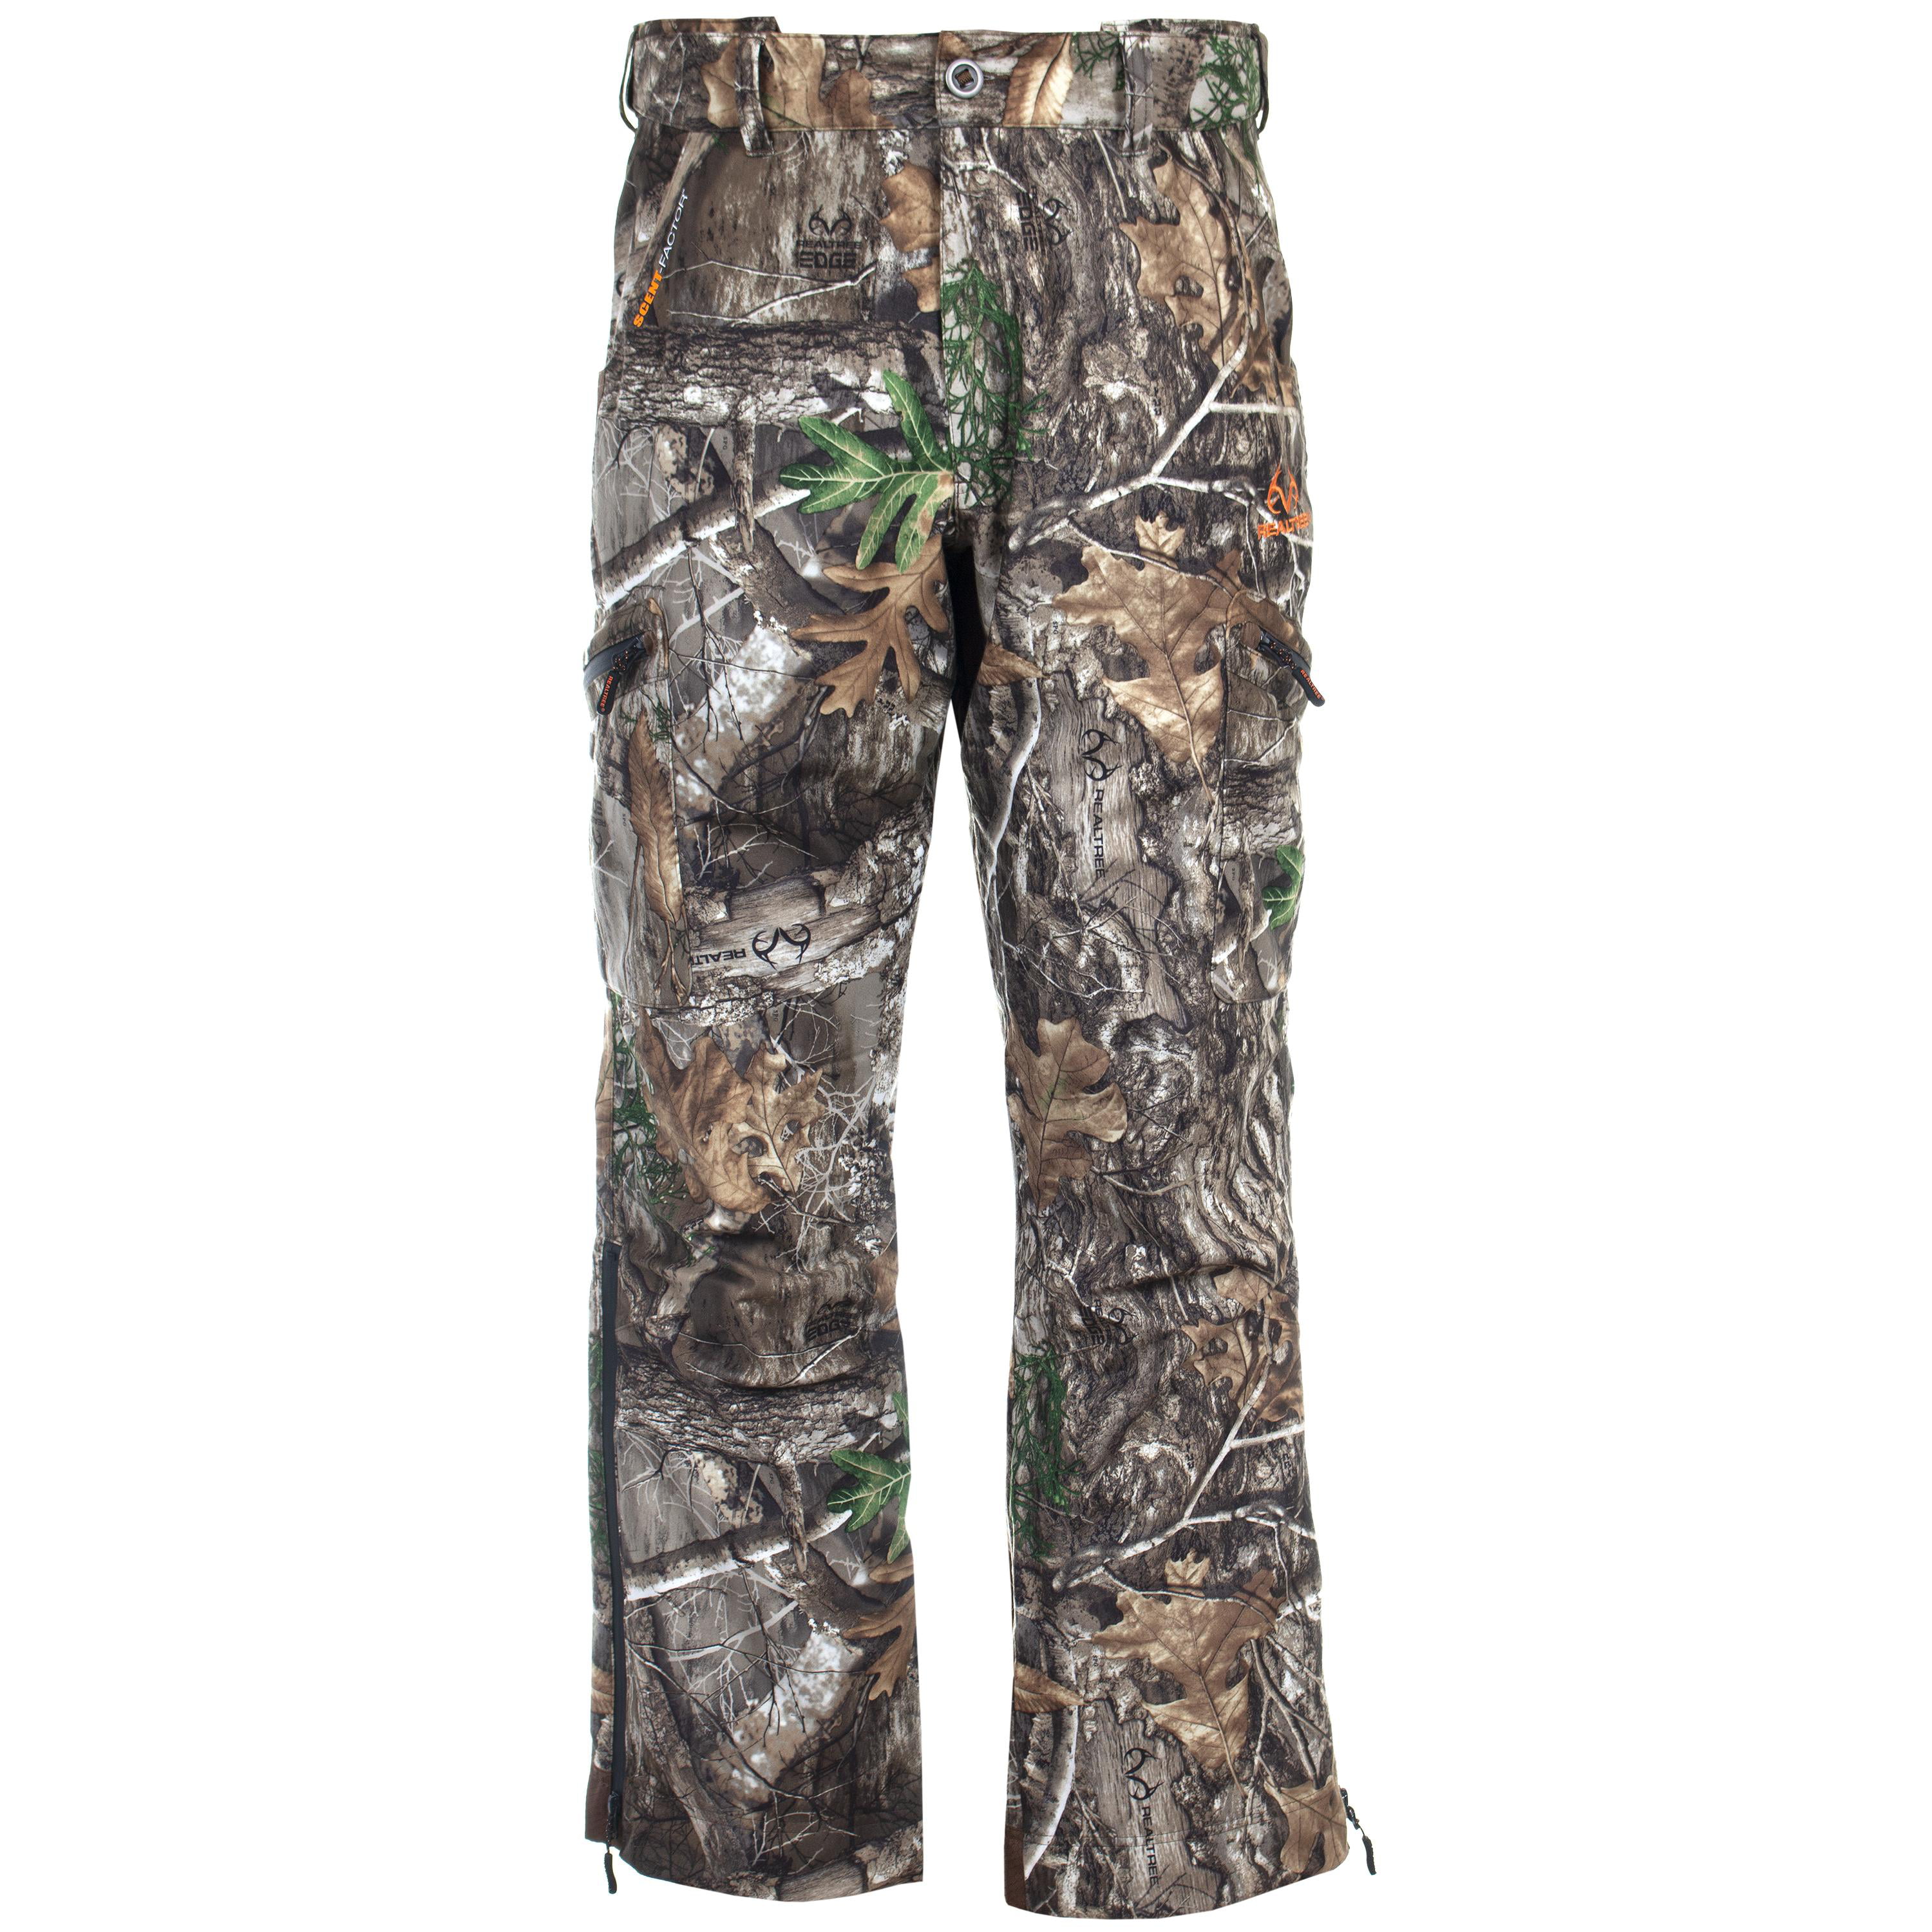 Men's Realtree Edge 2XL Scent Control & Breathable Hunting Pants NEW 44-46 